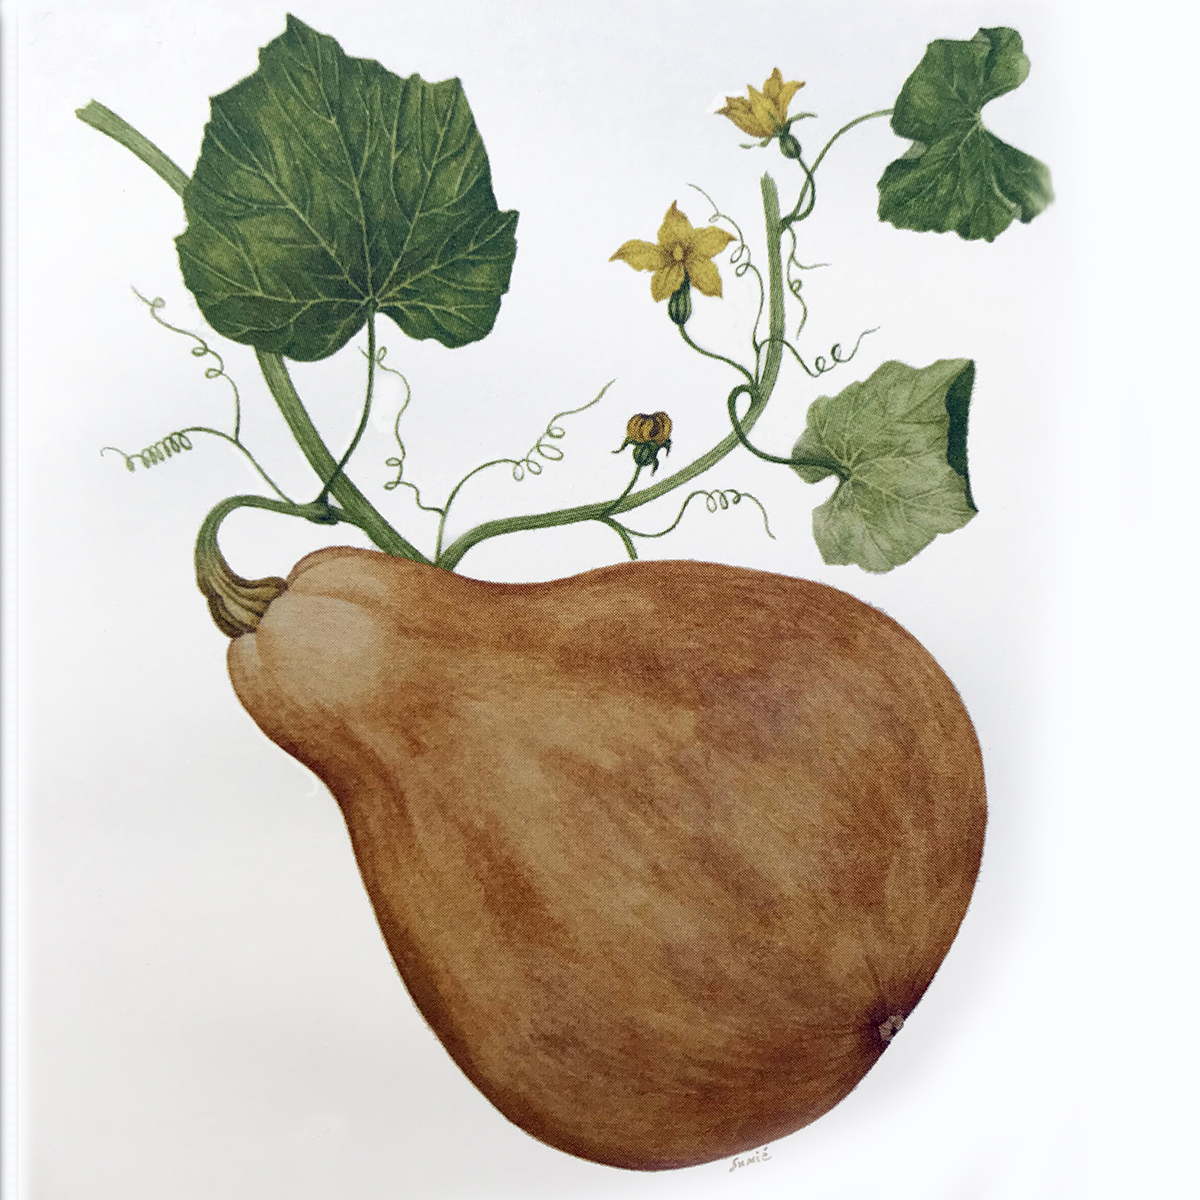 Gourd illustration by Sumié Hasegawa-Collins for Botanical Shakespeare: An Illustrated Compendium by Gerit Quealy